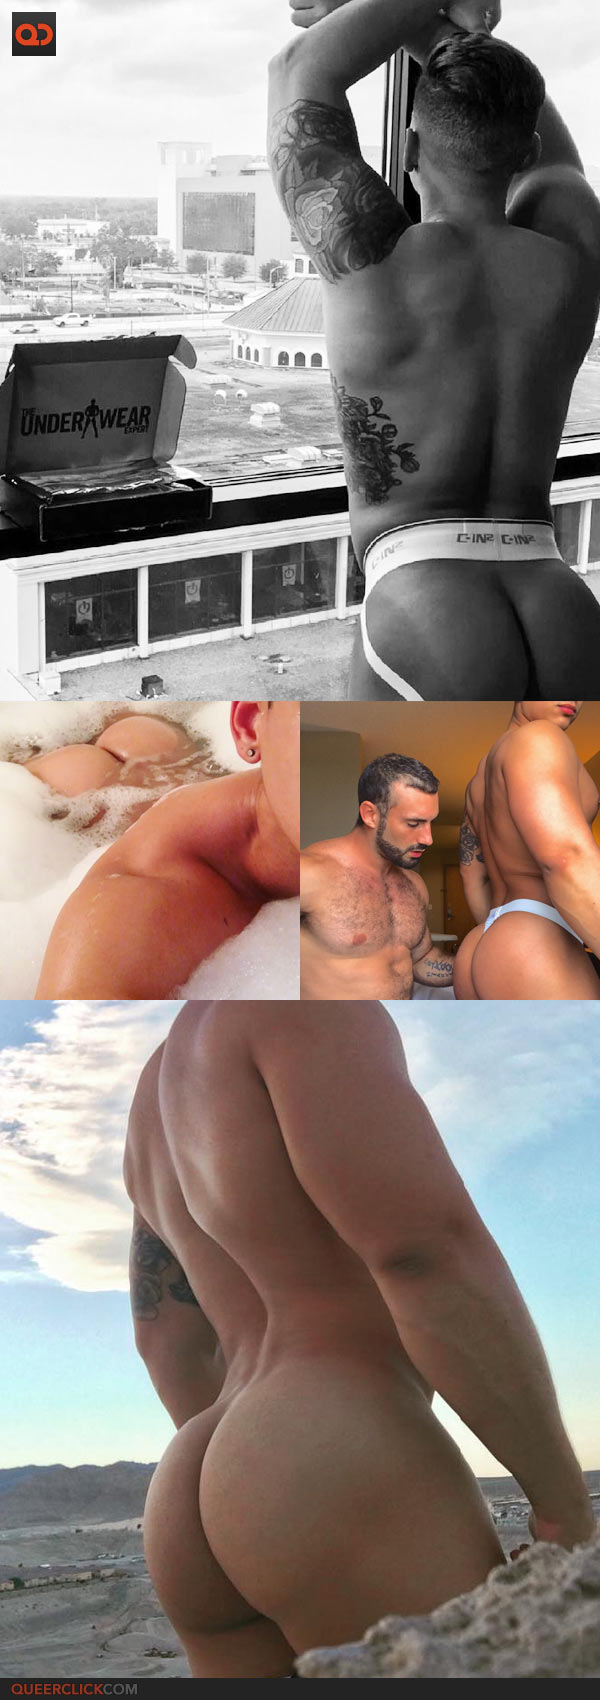 Ten Muscle Butts From Instagram That You Need In Your Life This Week!